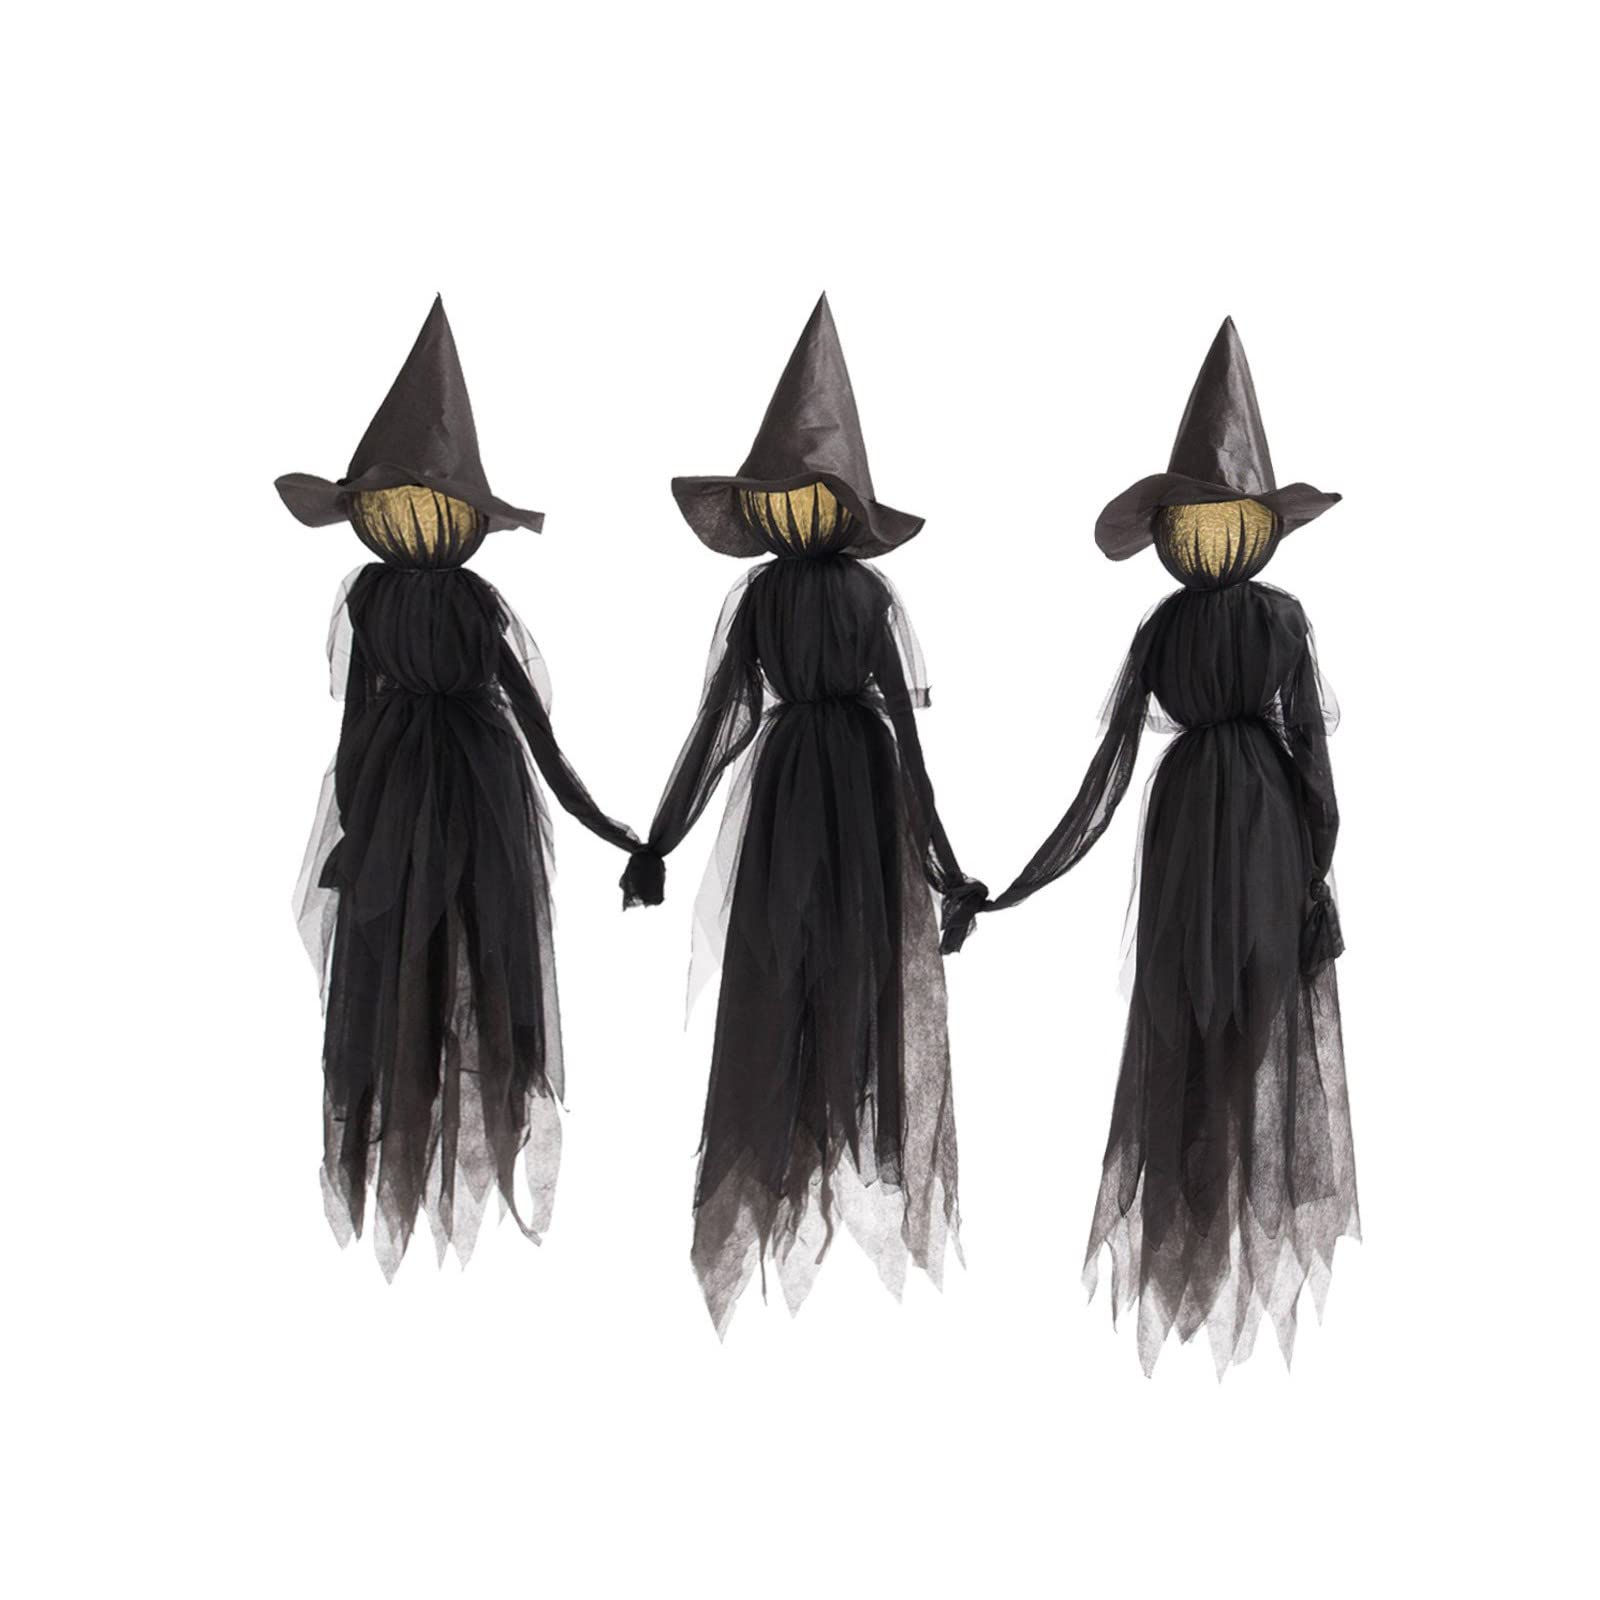 Halloween Decorations Outdoor, Light Up Holding Hands Screaming Witches with Stakes for Outdoor, Scary Decor Standing Witch Decor for Home Outside Yard Lawn Garden Party (3pcs)